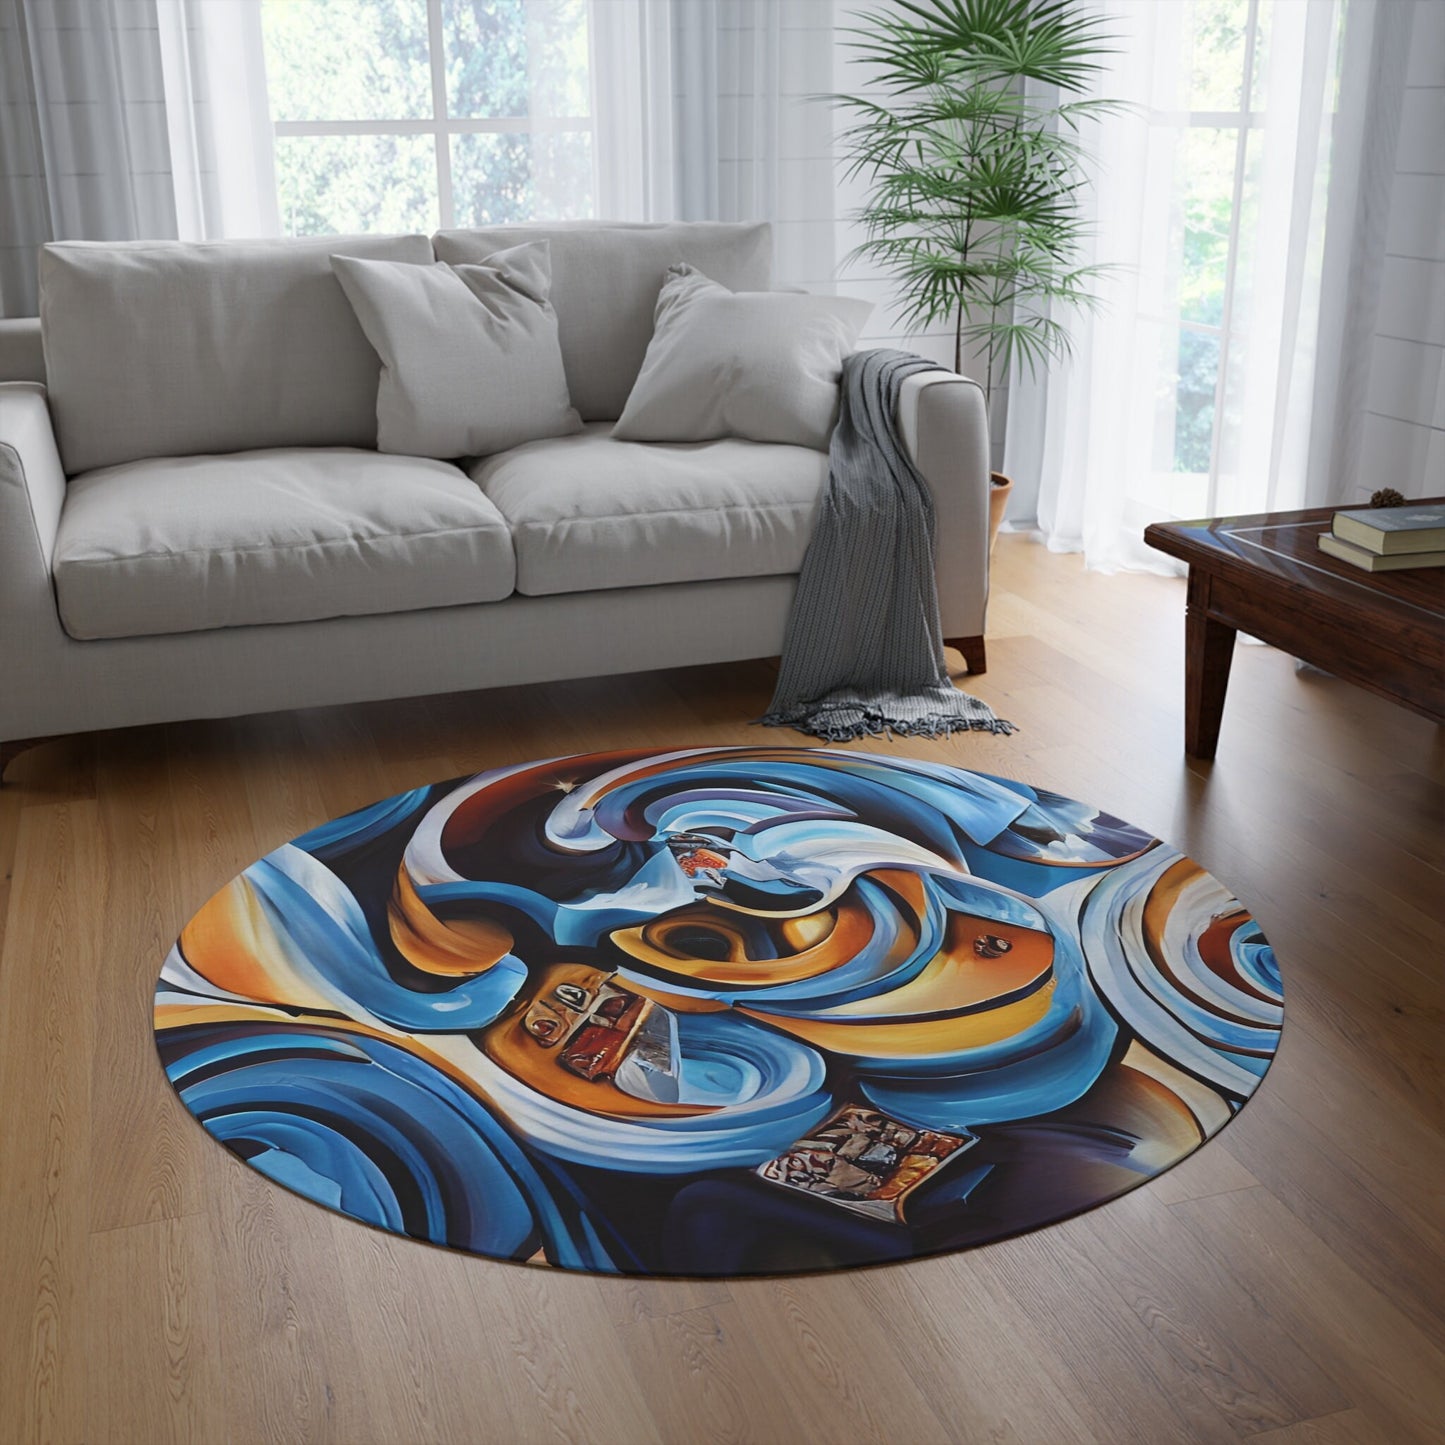 Abstract Art Rug colorful swirly blue yellow contemporary rugs 2x3 4x6 5x7 8x10 large rugs